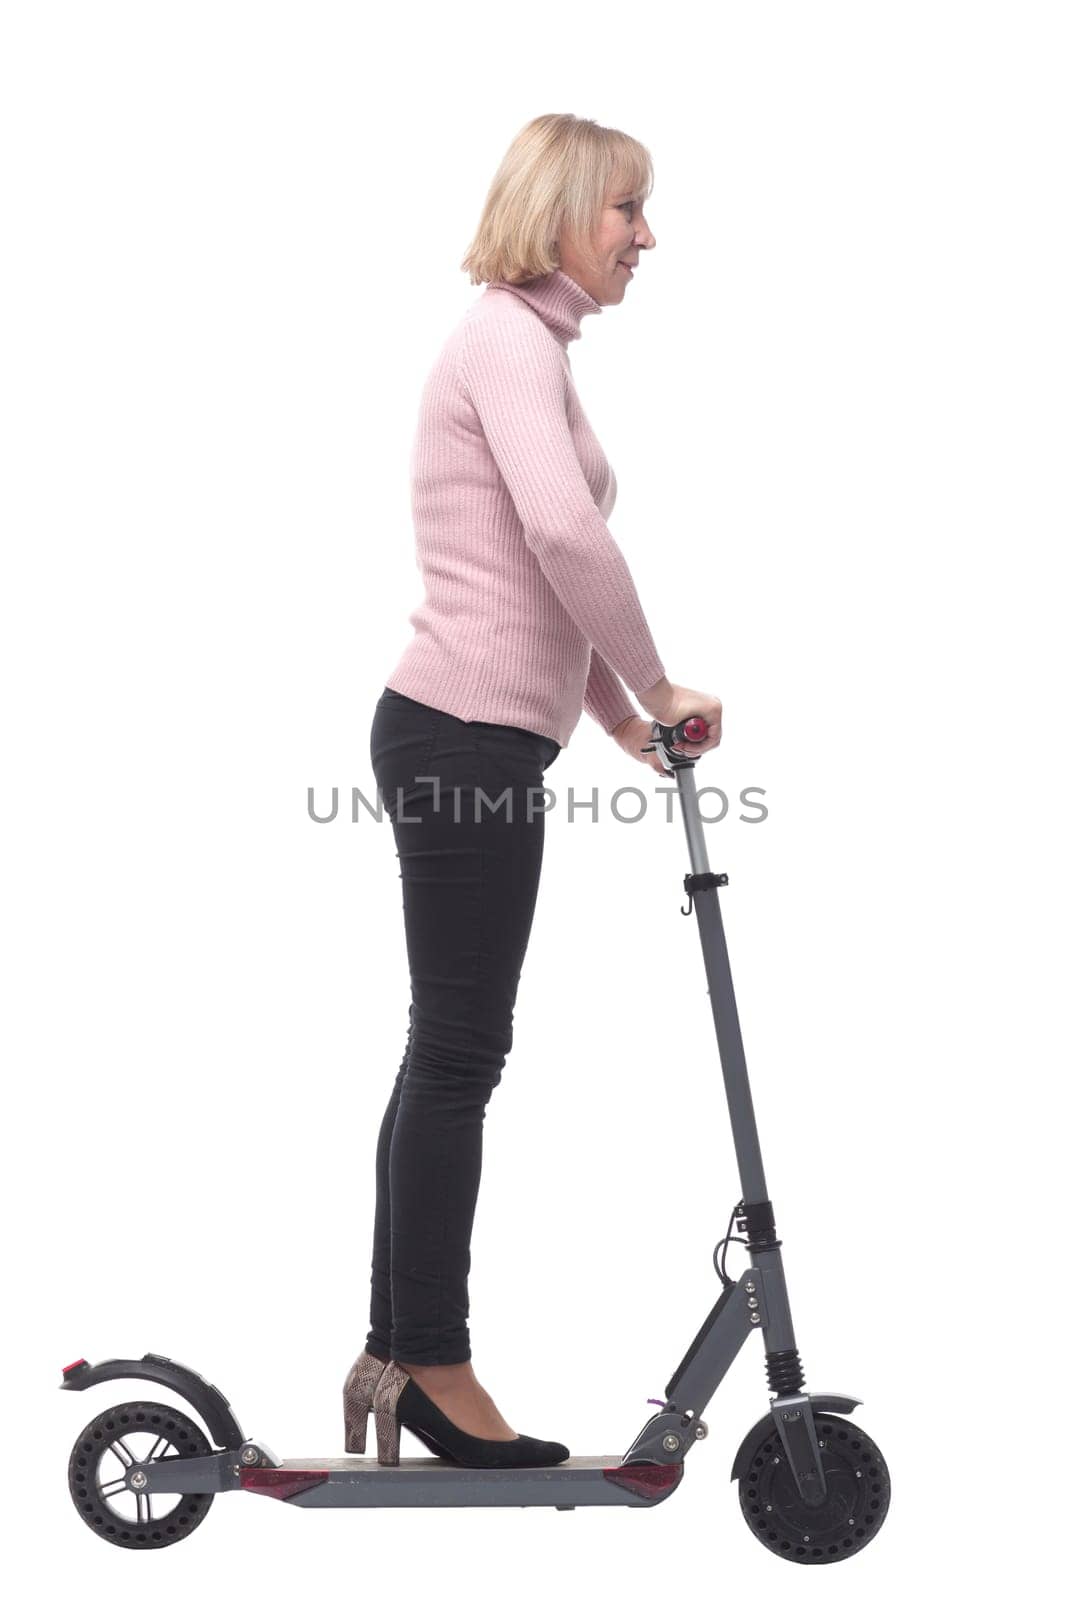 Beautiful woman riding an electric scooter isolated on white background by asdf